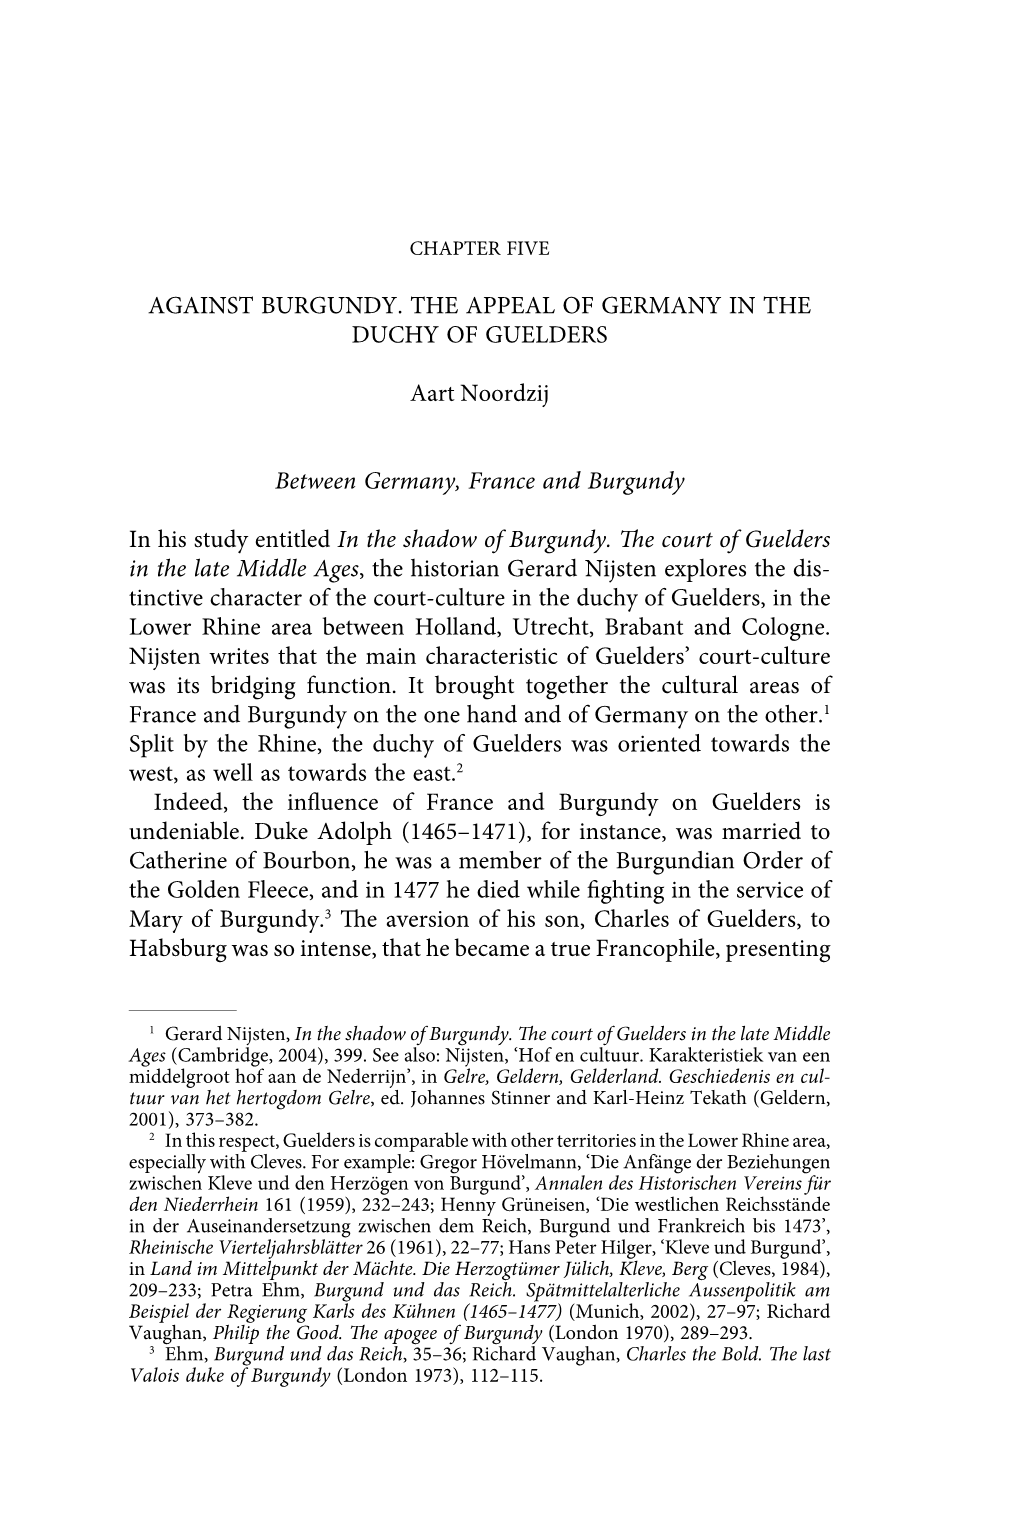 Against Burgundy. the Appeal of Germany in the Duchy of Guelders